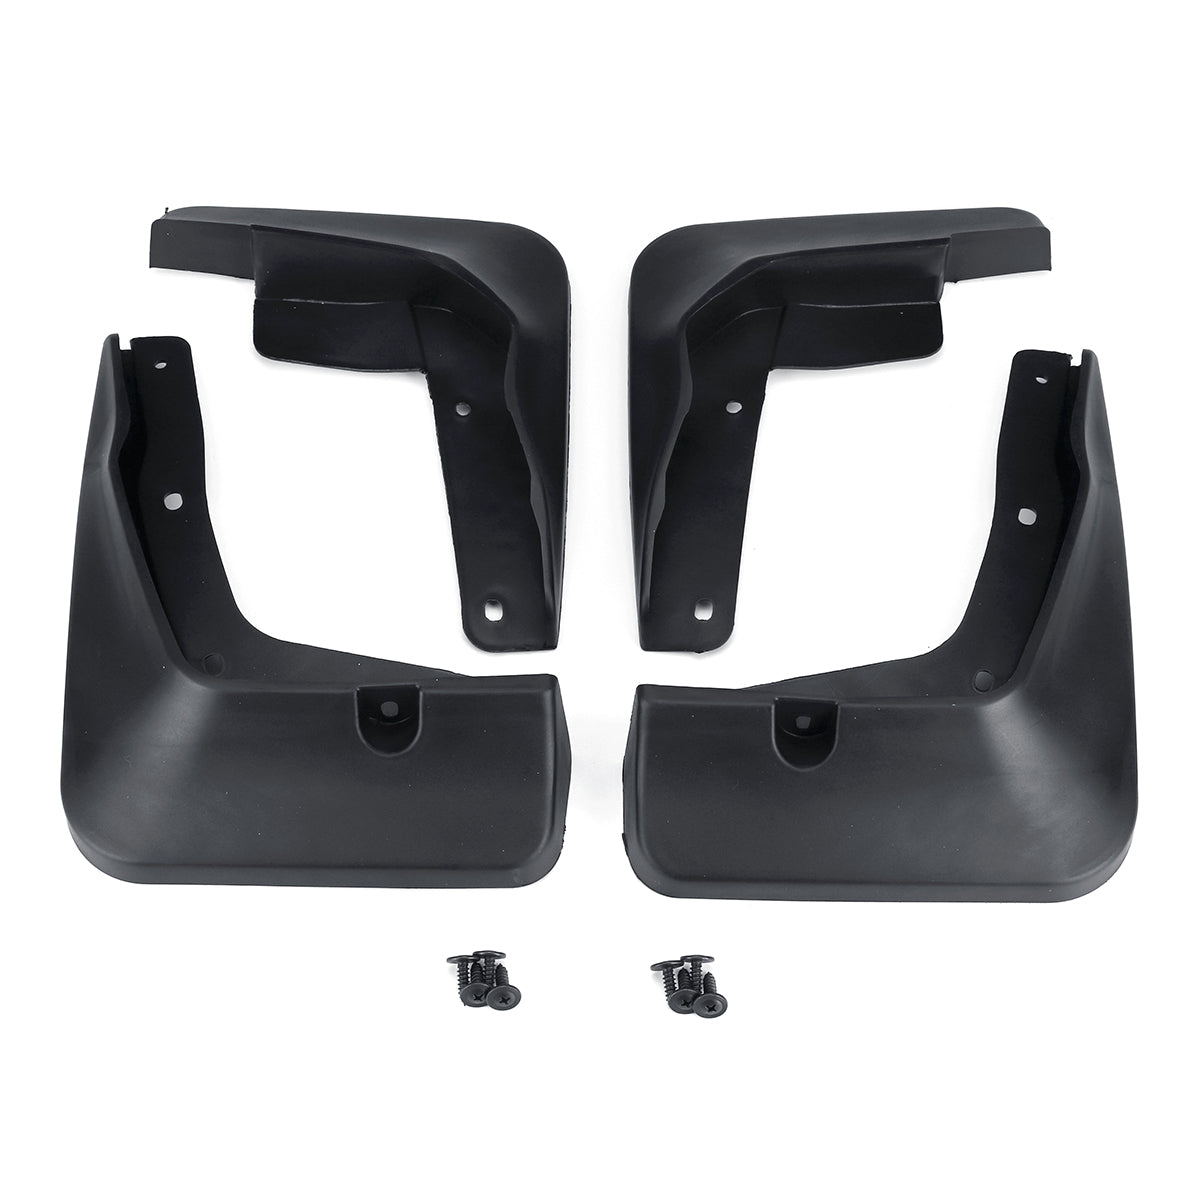 Oshotto Mud Flap (O.E.M Type) For New Skoda Rapid 2017,2018,2019,2020 (T-II) (Set of 4)